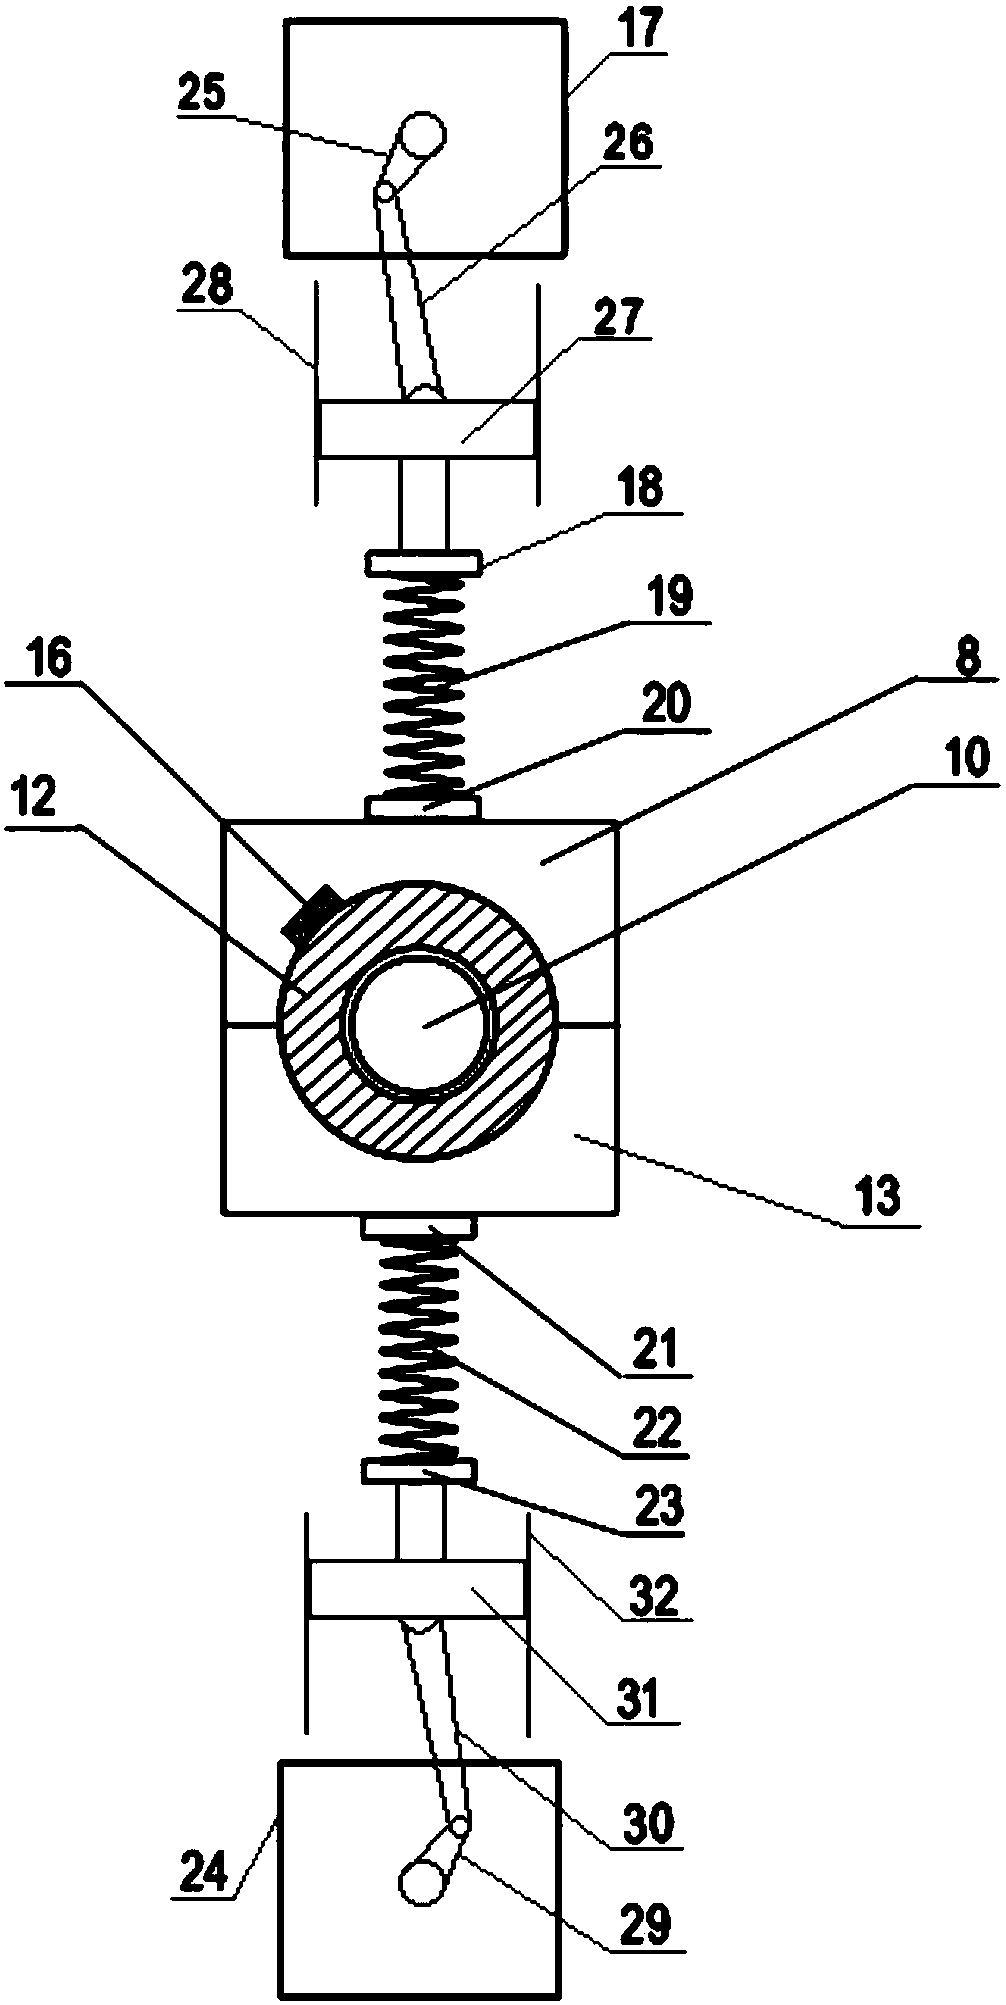 Rolling bearing performance testing device based on loadable alternating load of crank connecting rod